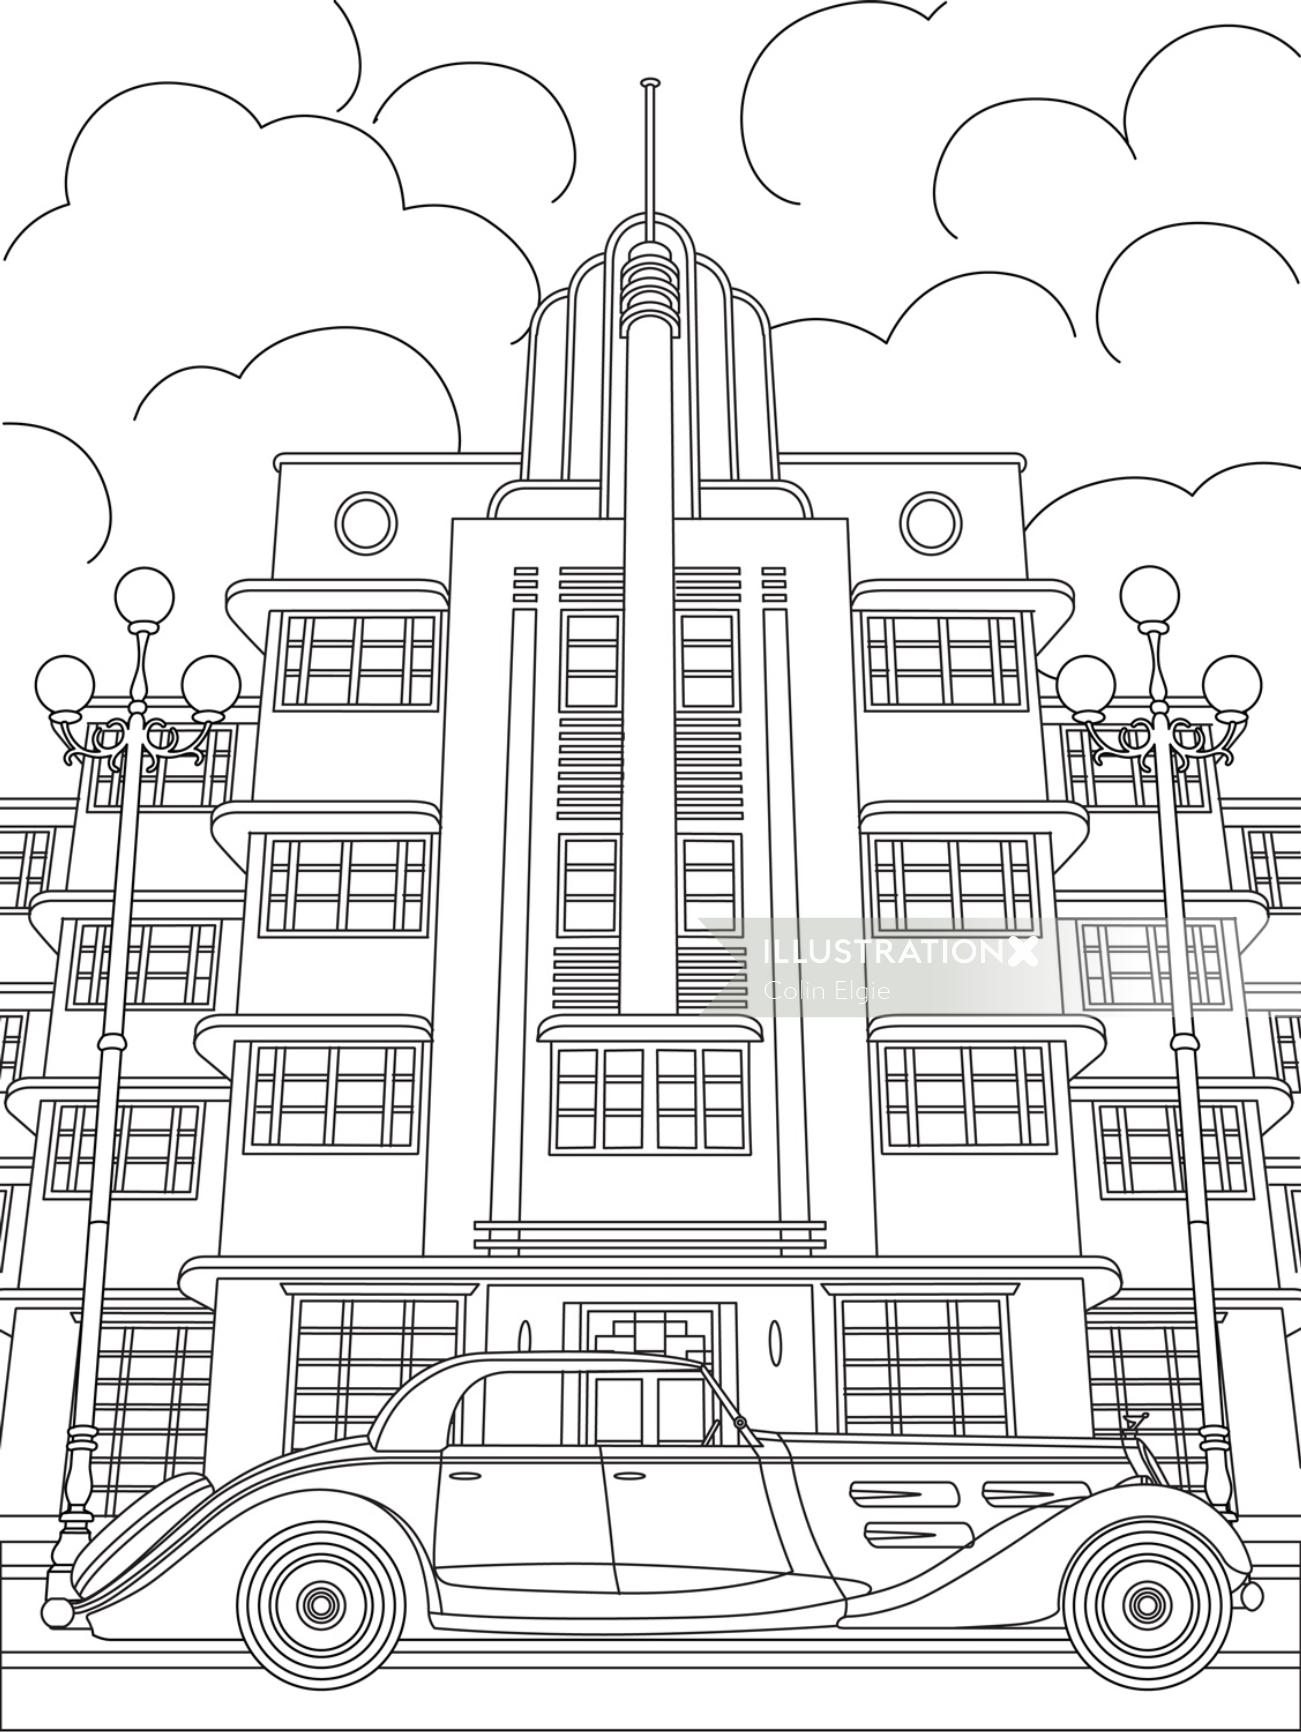 Line drawing of Deco building and car